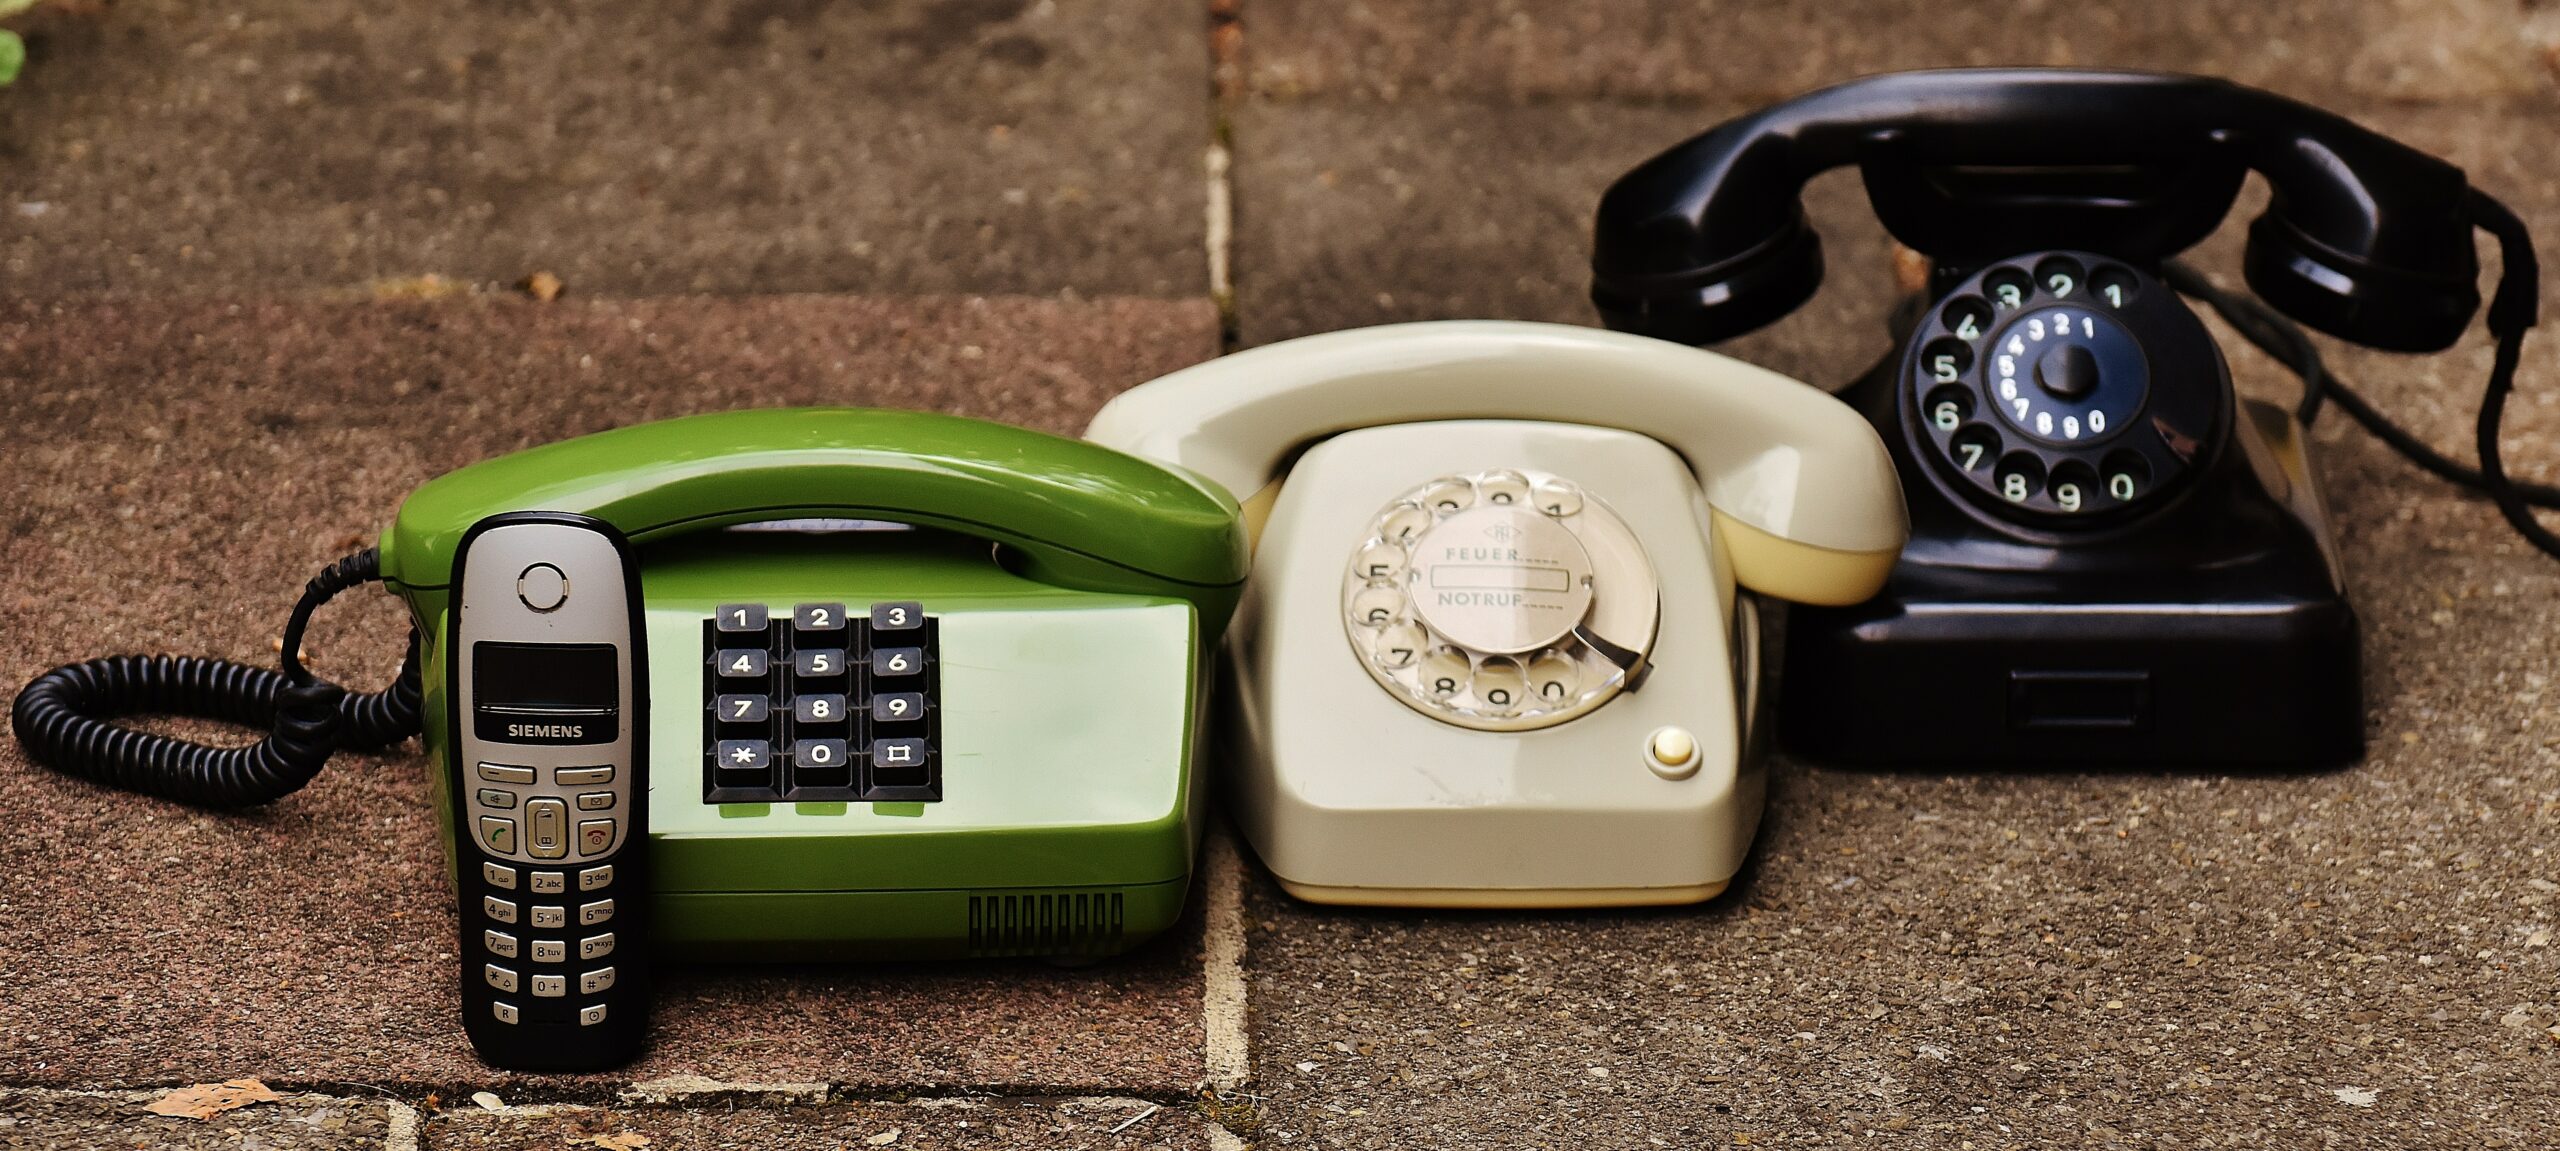 How to Format Phone Numbers - BusinessWritingBlog